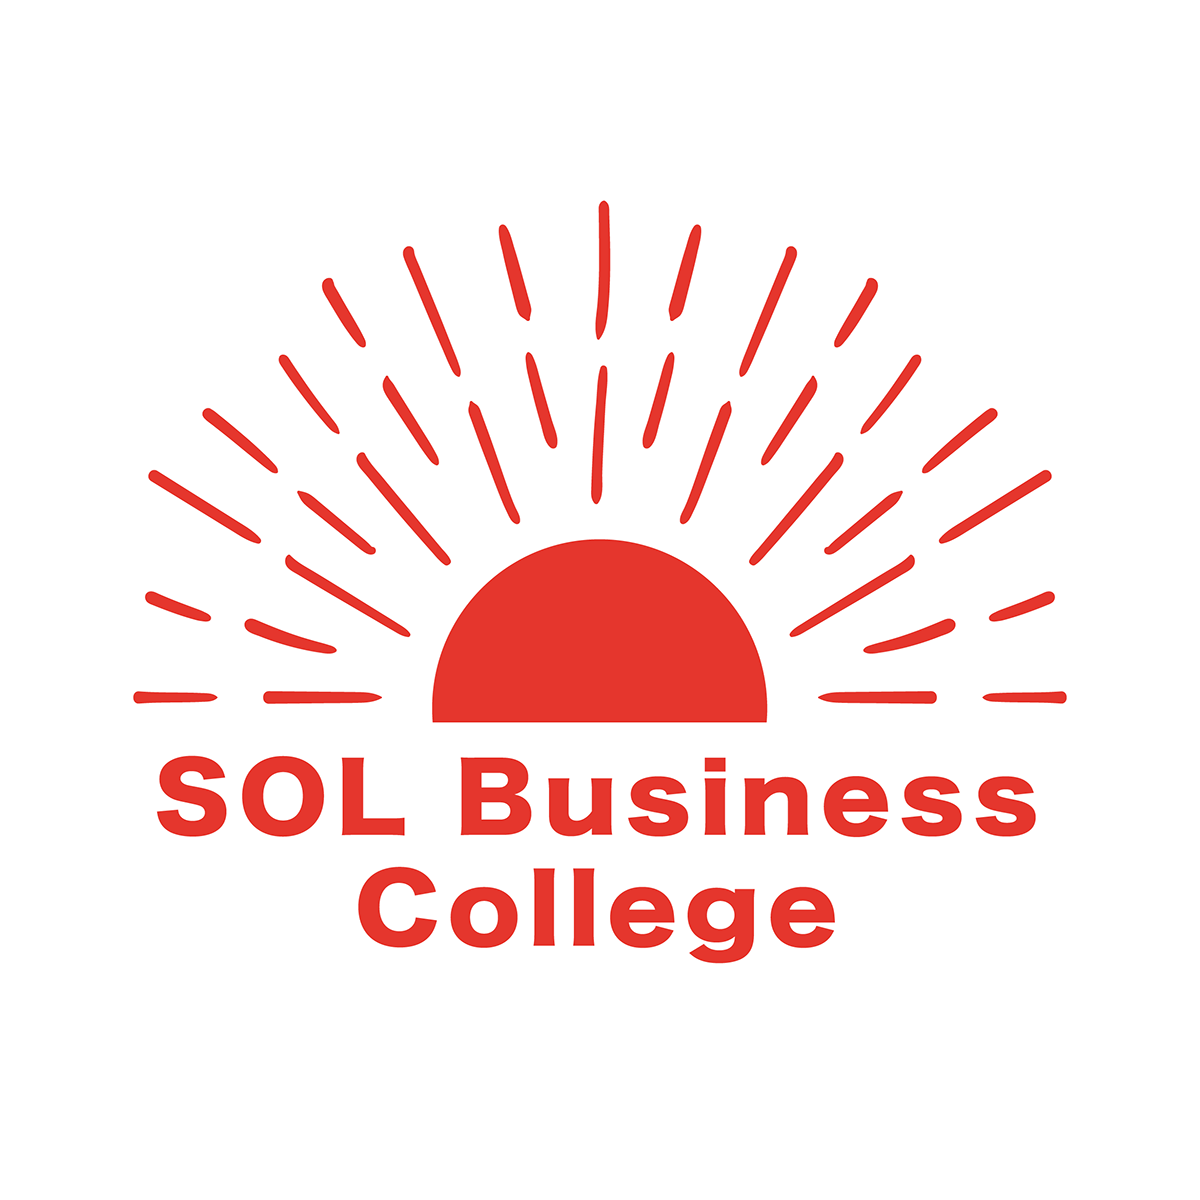 SOL Business College